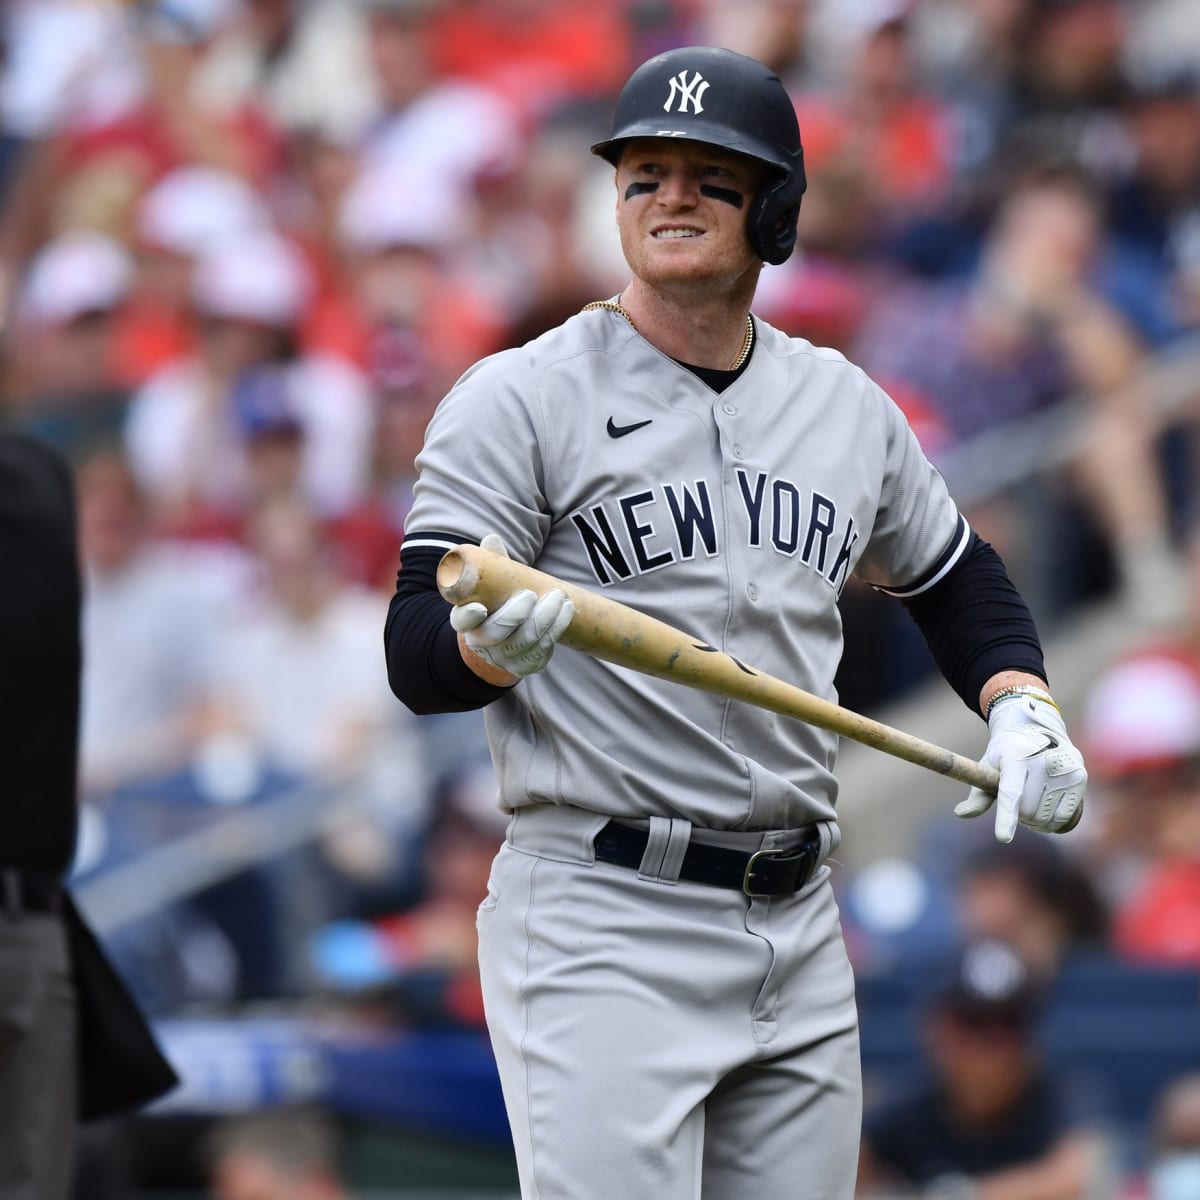 Yankees outfielder Clint Frazier ruled out for remainder of season